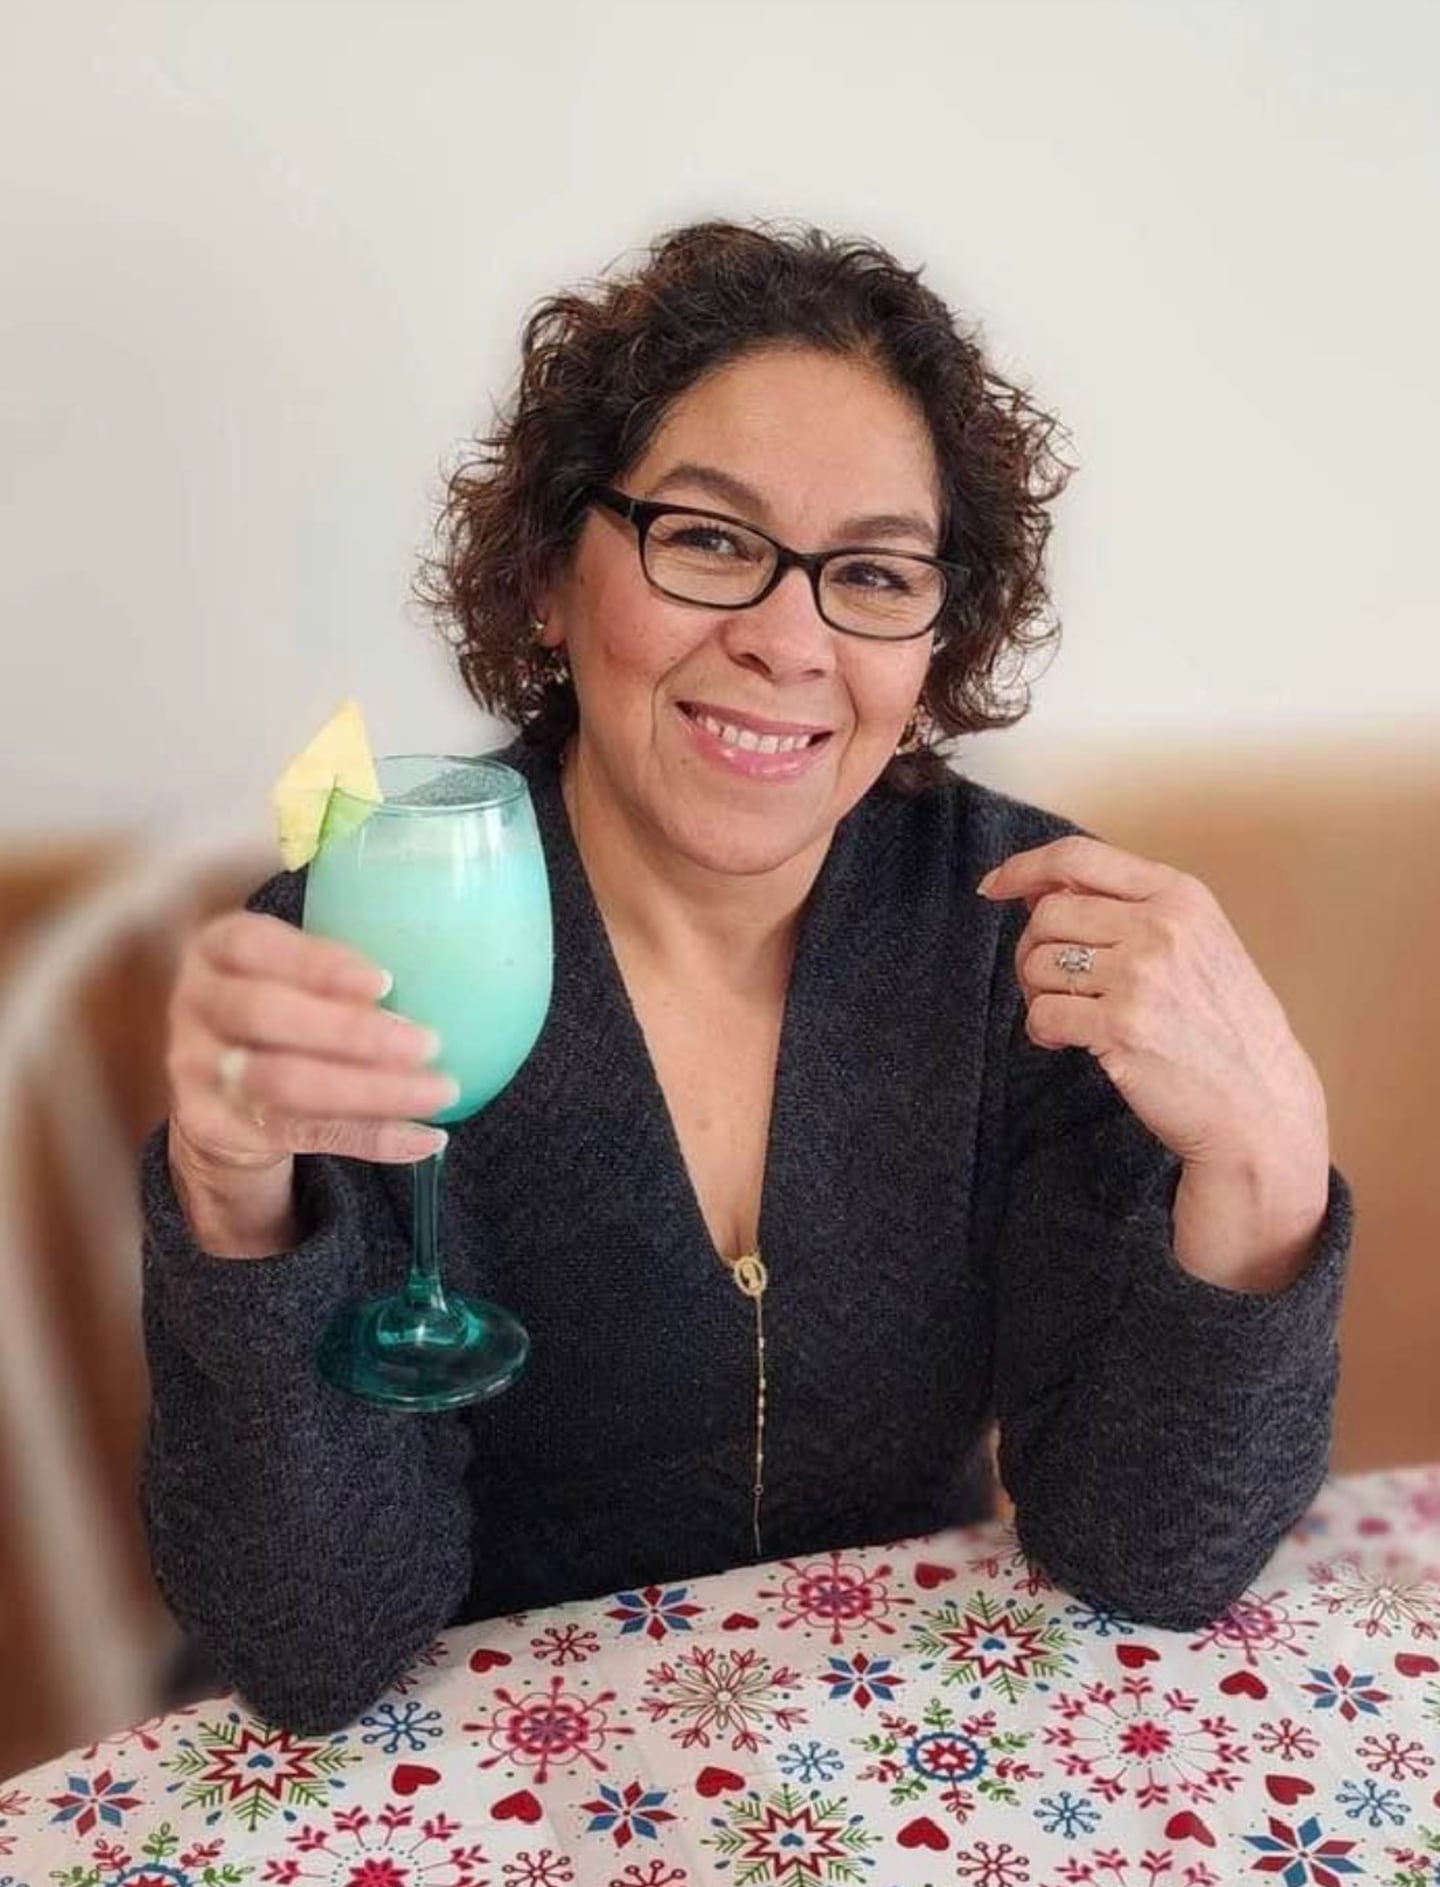 Graciela Reza Contreras, of DeKalb, poses with drink in hand in this photo dated May 2021. Reza Contreras was killed in a fatal car crash in DeKalb Sunday, Nov. 5, 2023 allegedly caused by an off-duty police officer driving under the influence of alcohol, police said.